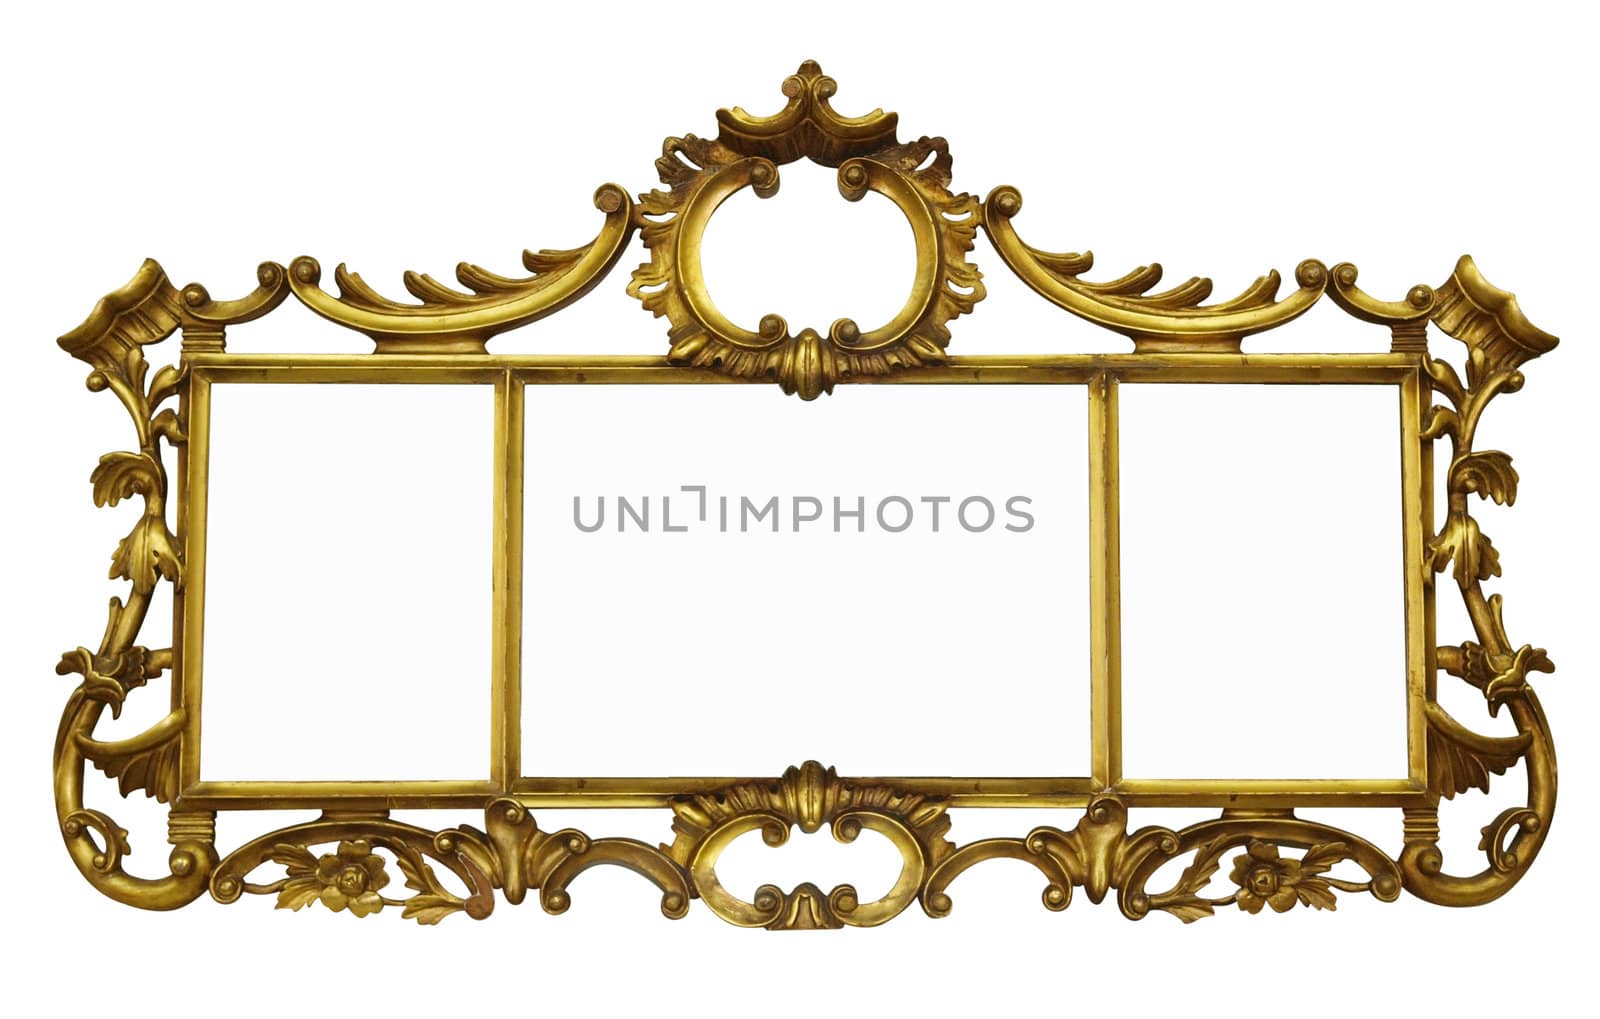 Antique Mirror with Copyspace by MargoJH